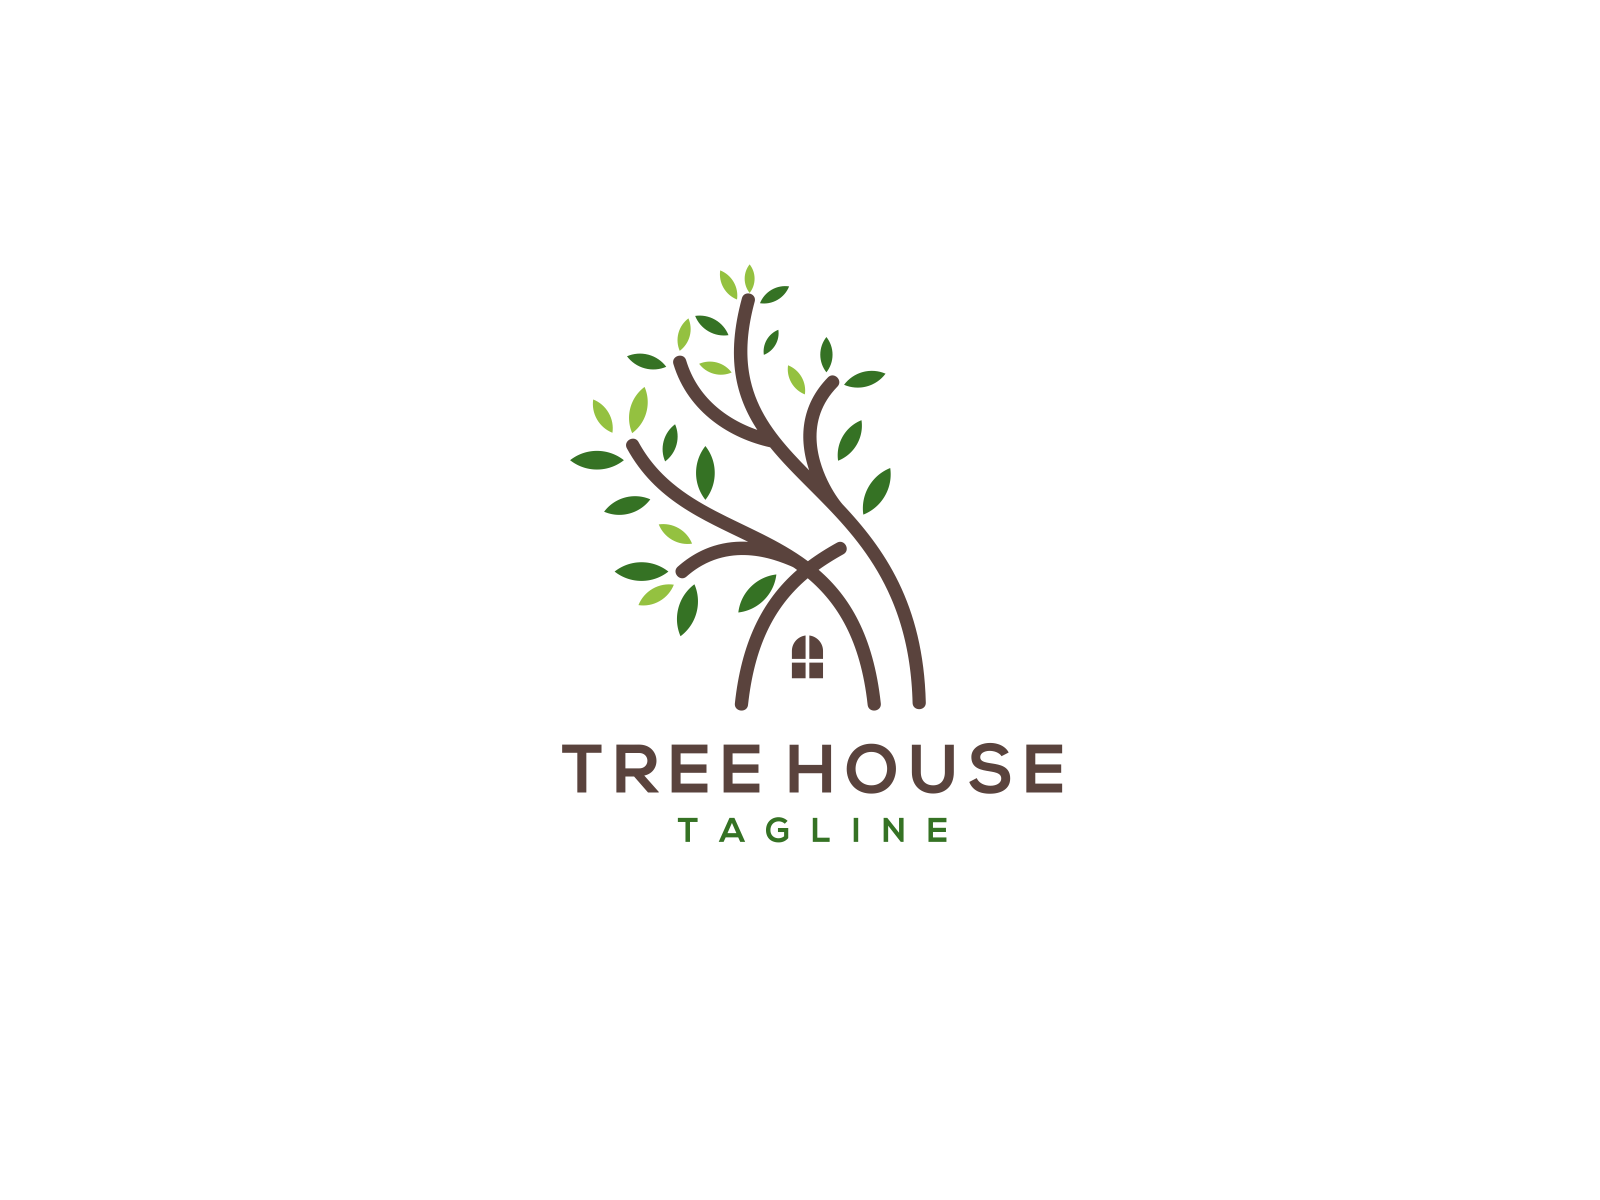 Tree House by Neat Lineart on Dribbble